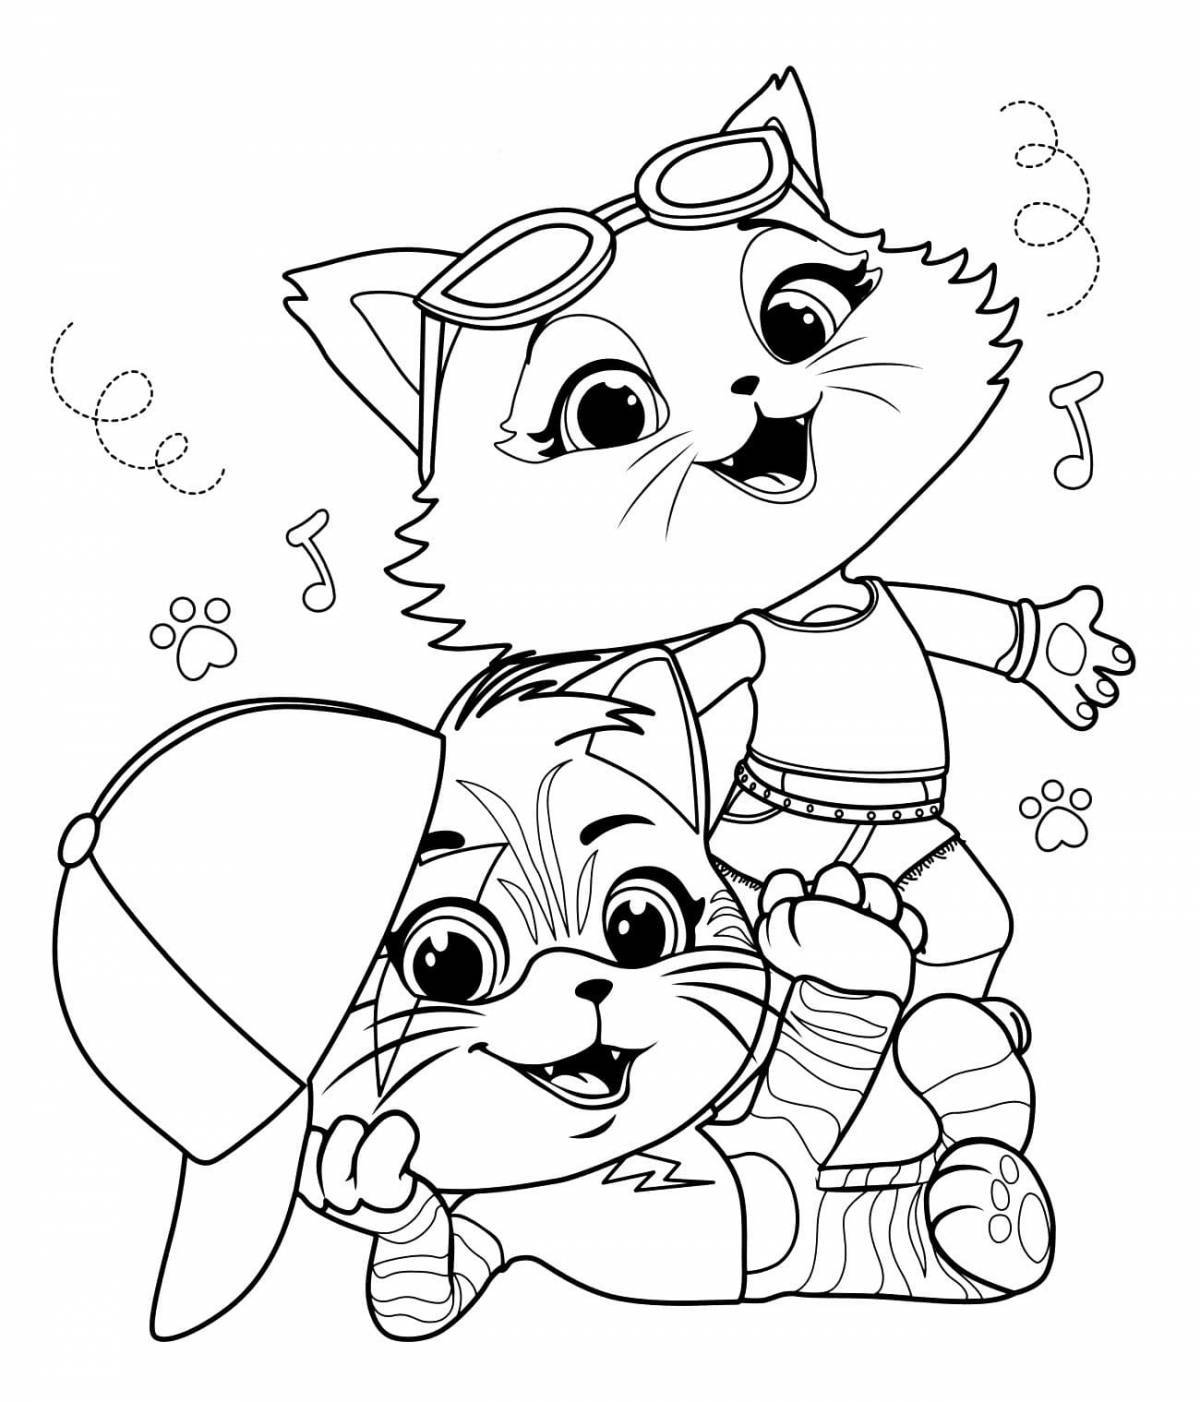 Kitty giggling coloring book